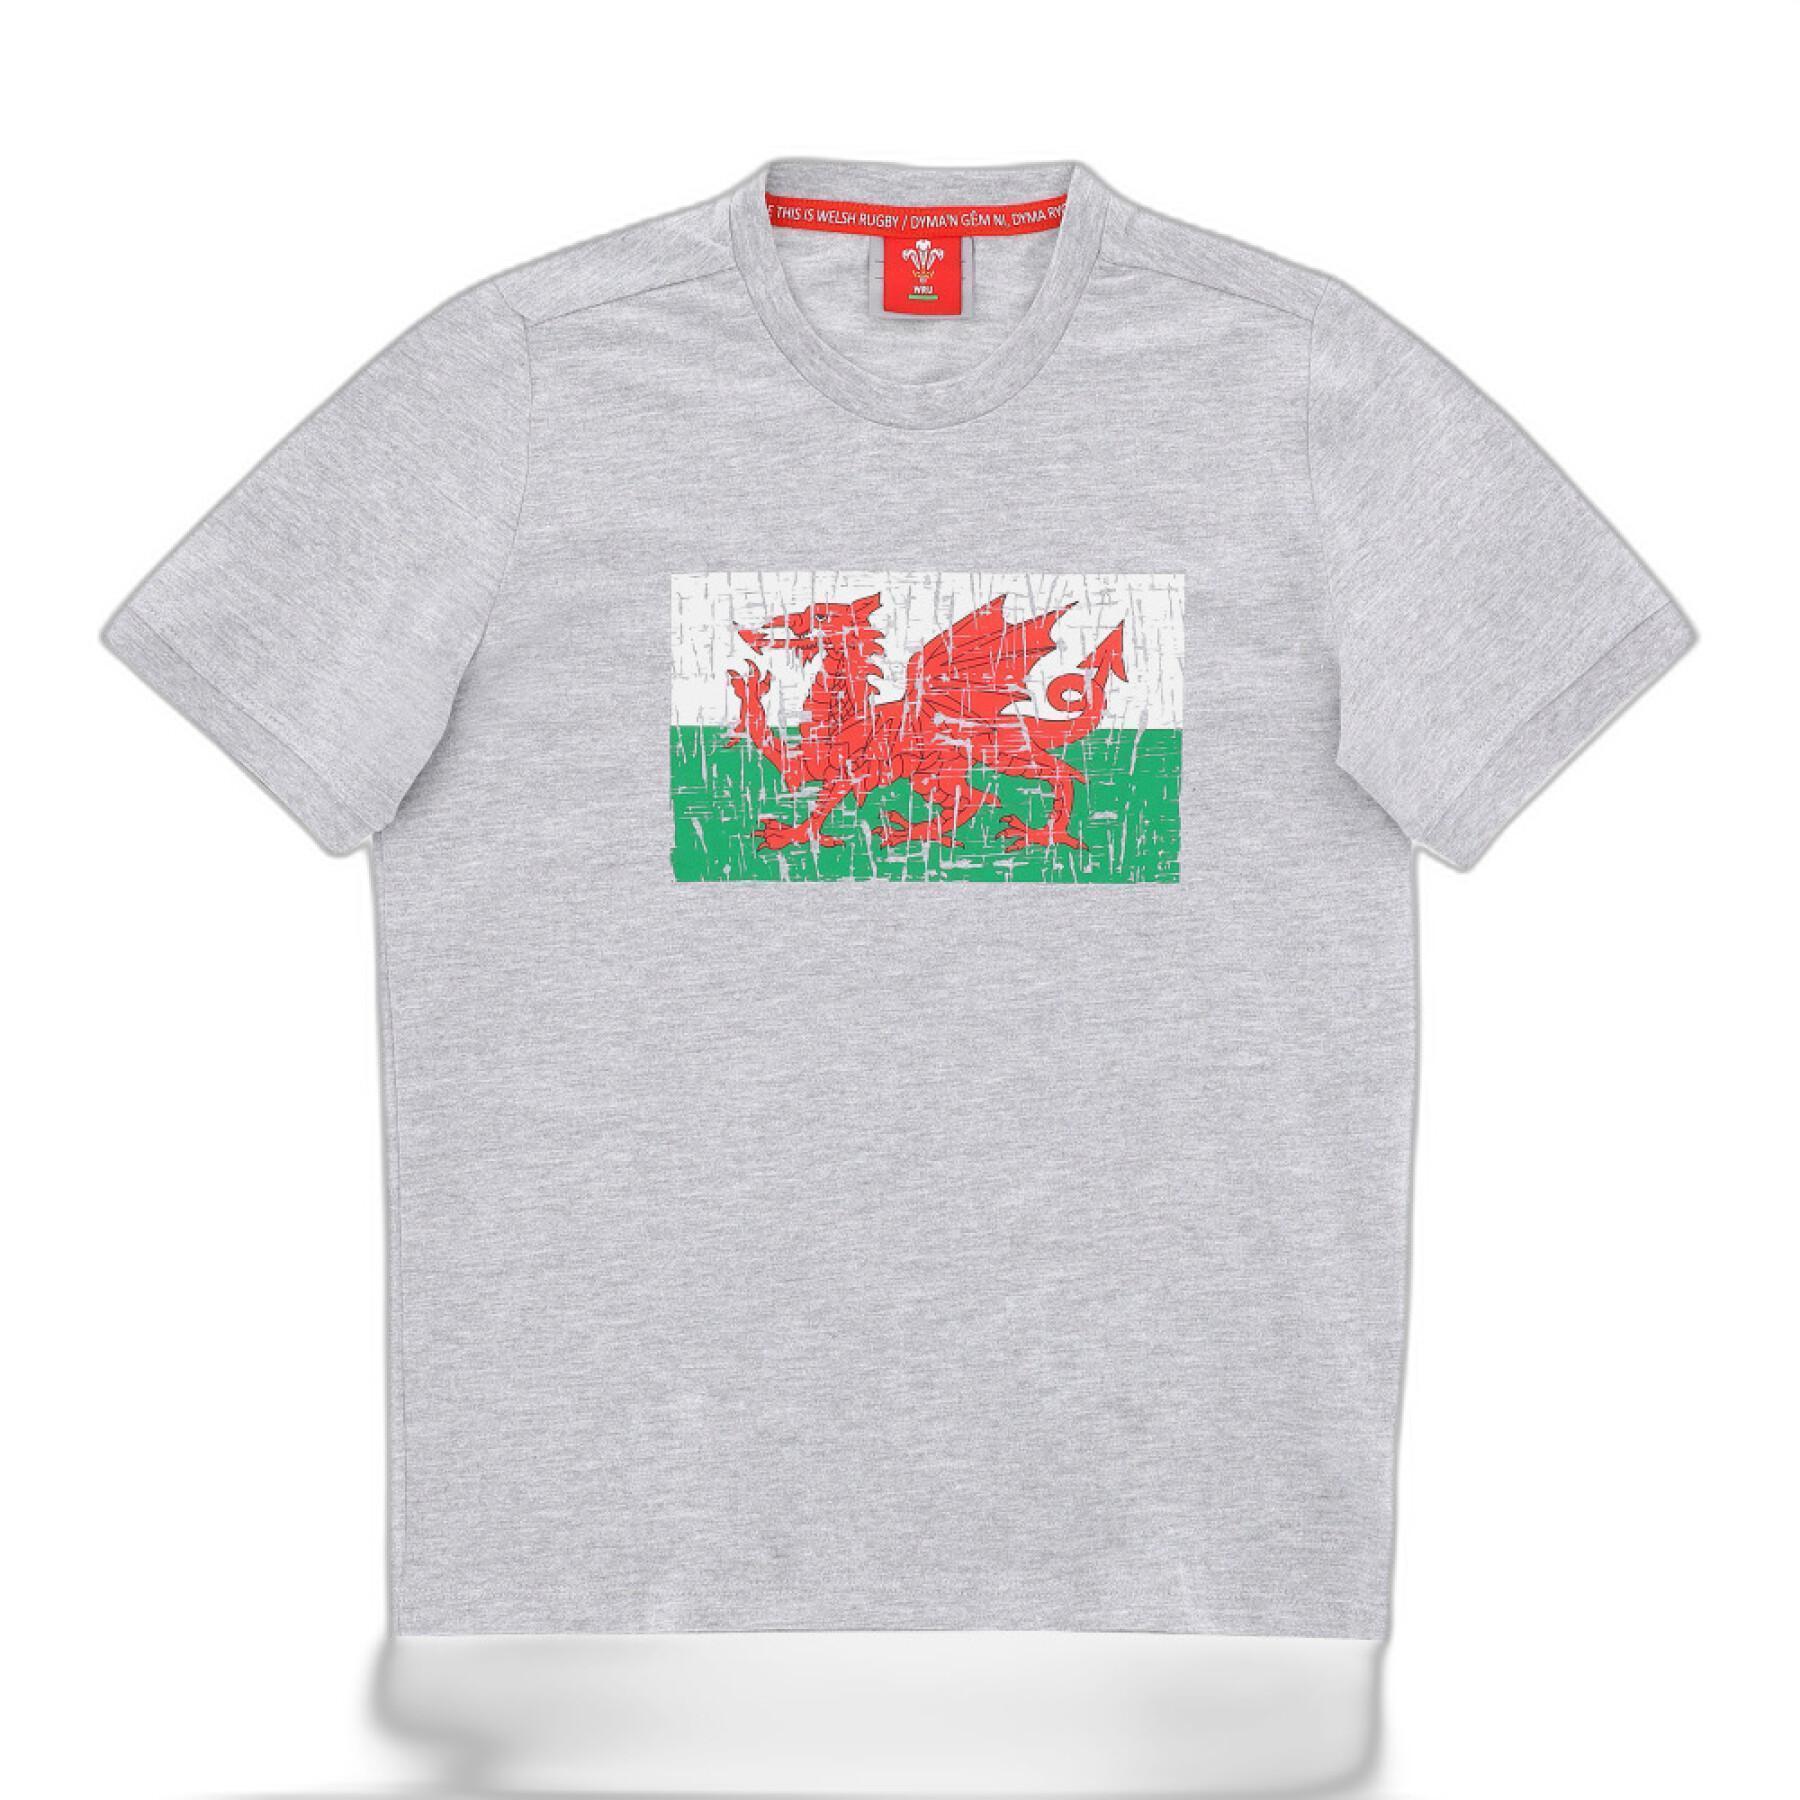 Child's T-shirt Pays de Galles Rugby XV 2020/21